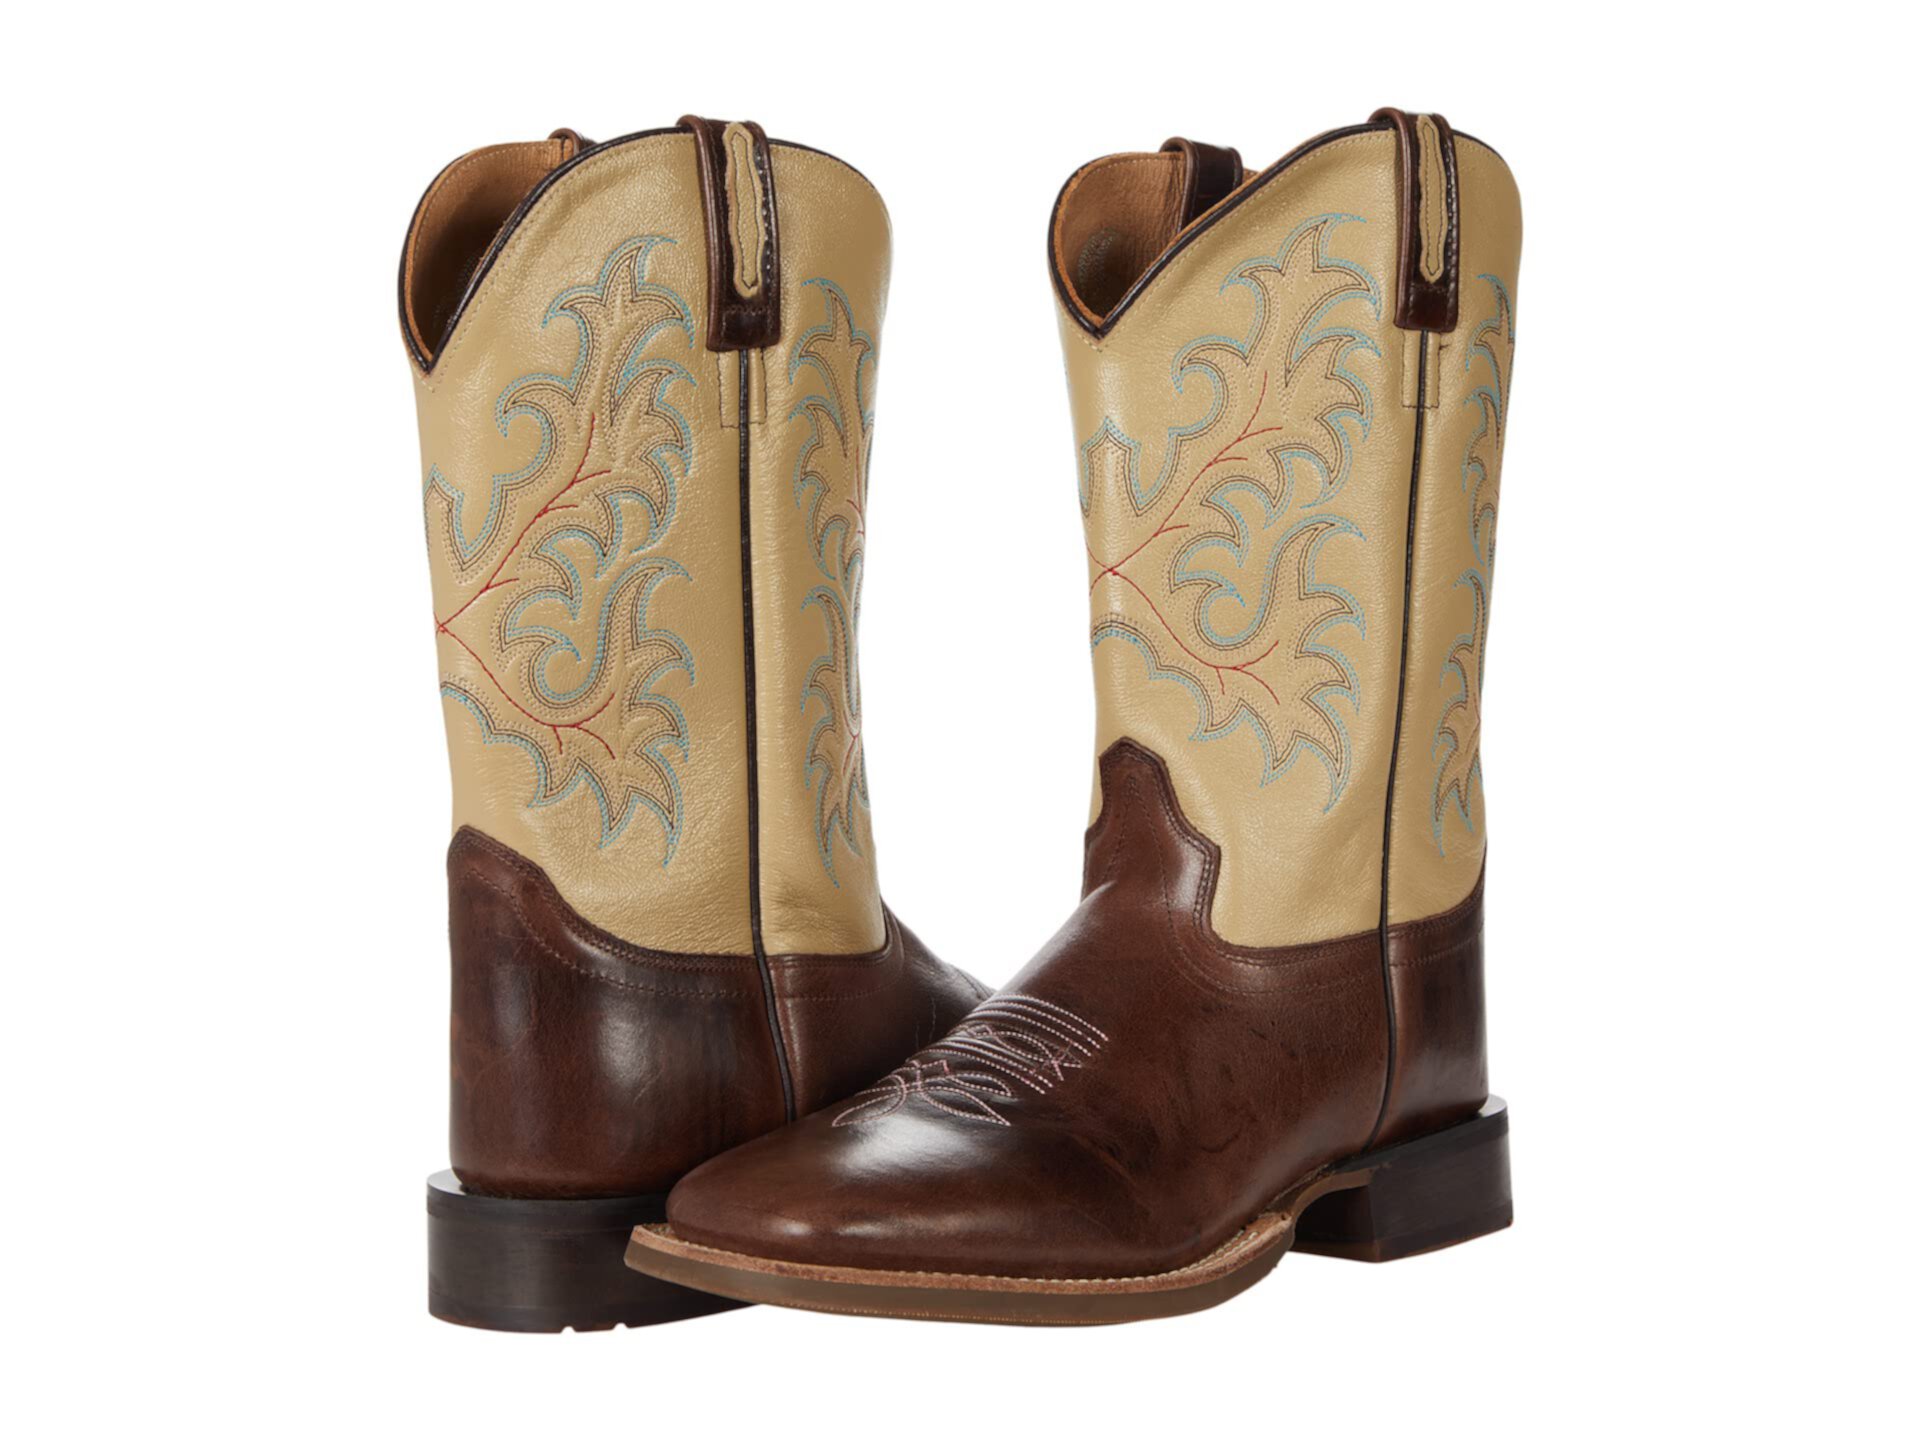 BSM1893 Old West Boots